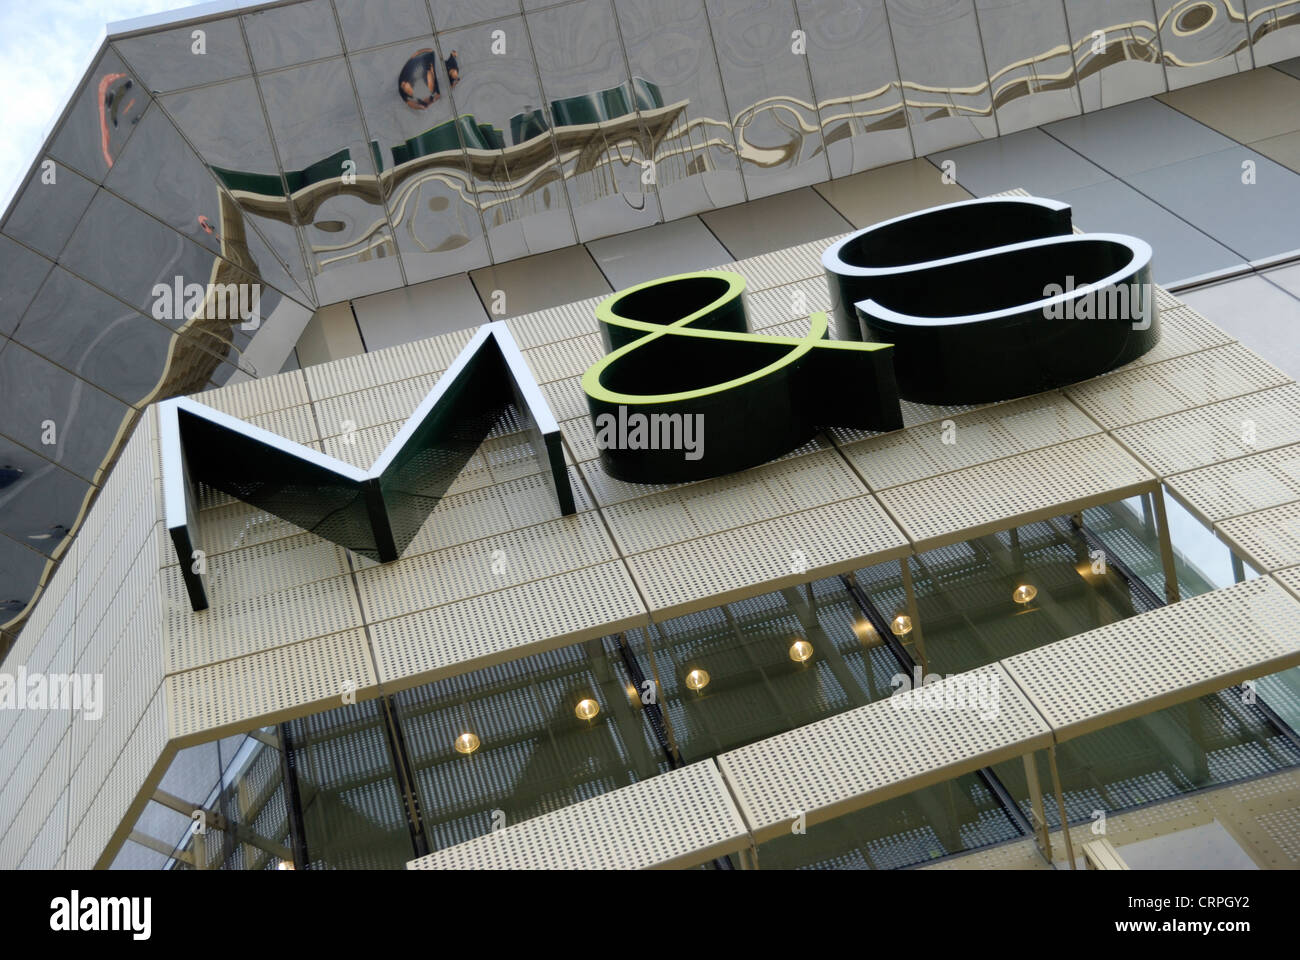 M & S (Marks & Spencer) sign on their store at Westfield Stratford City. Stock Photo